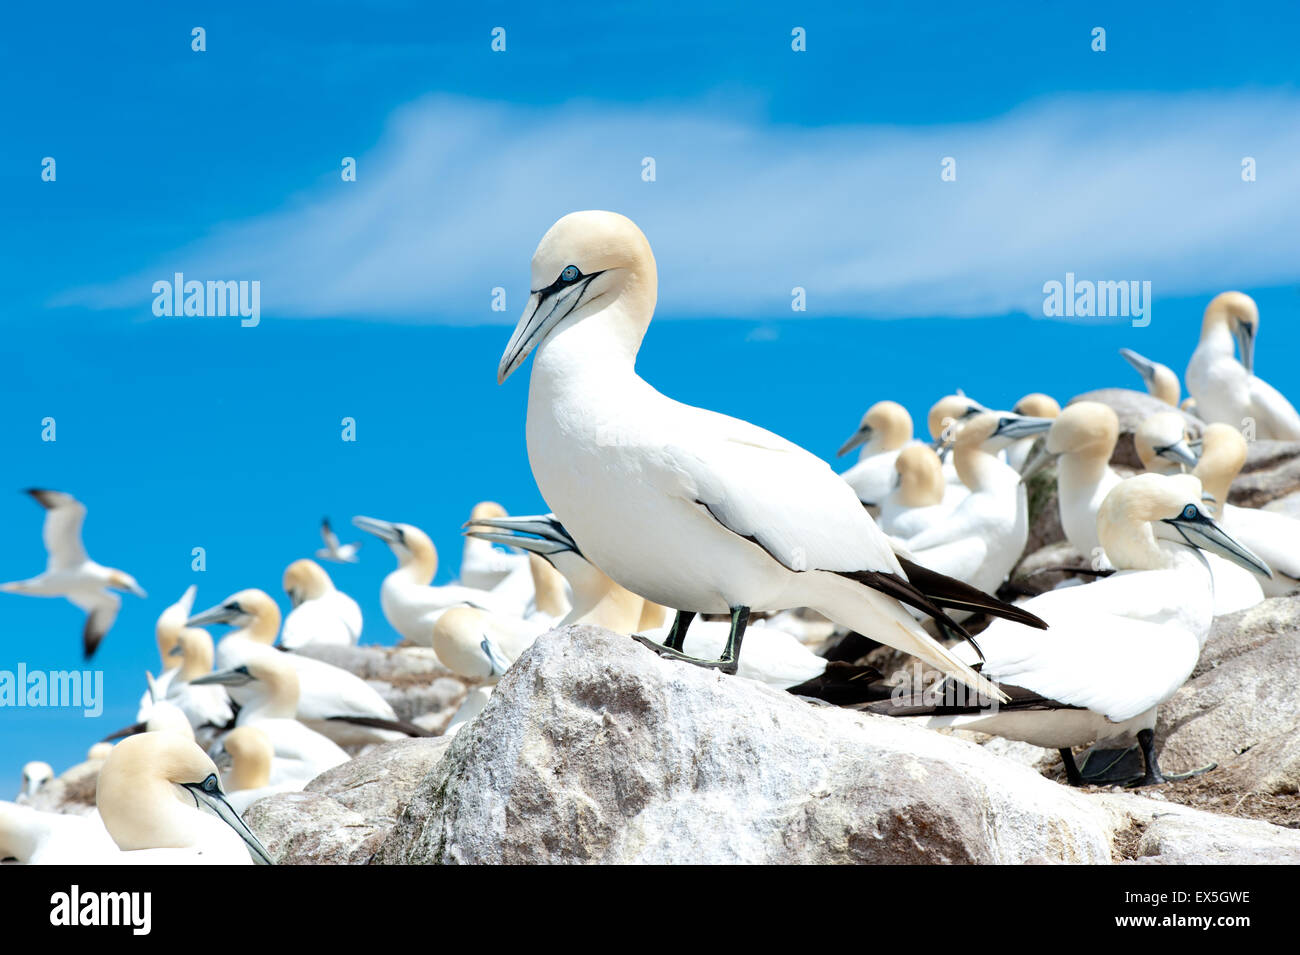 The Gannets are white birds with black tipped wings and a long bill. Stock Photo